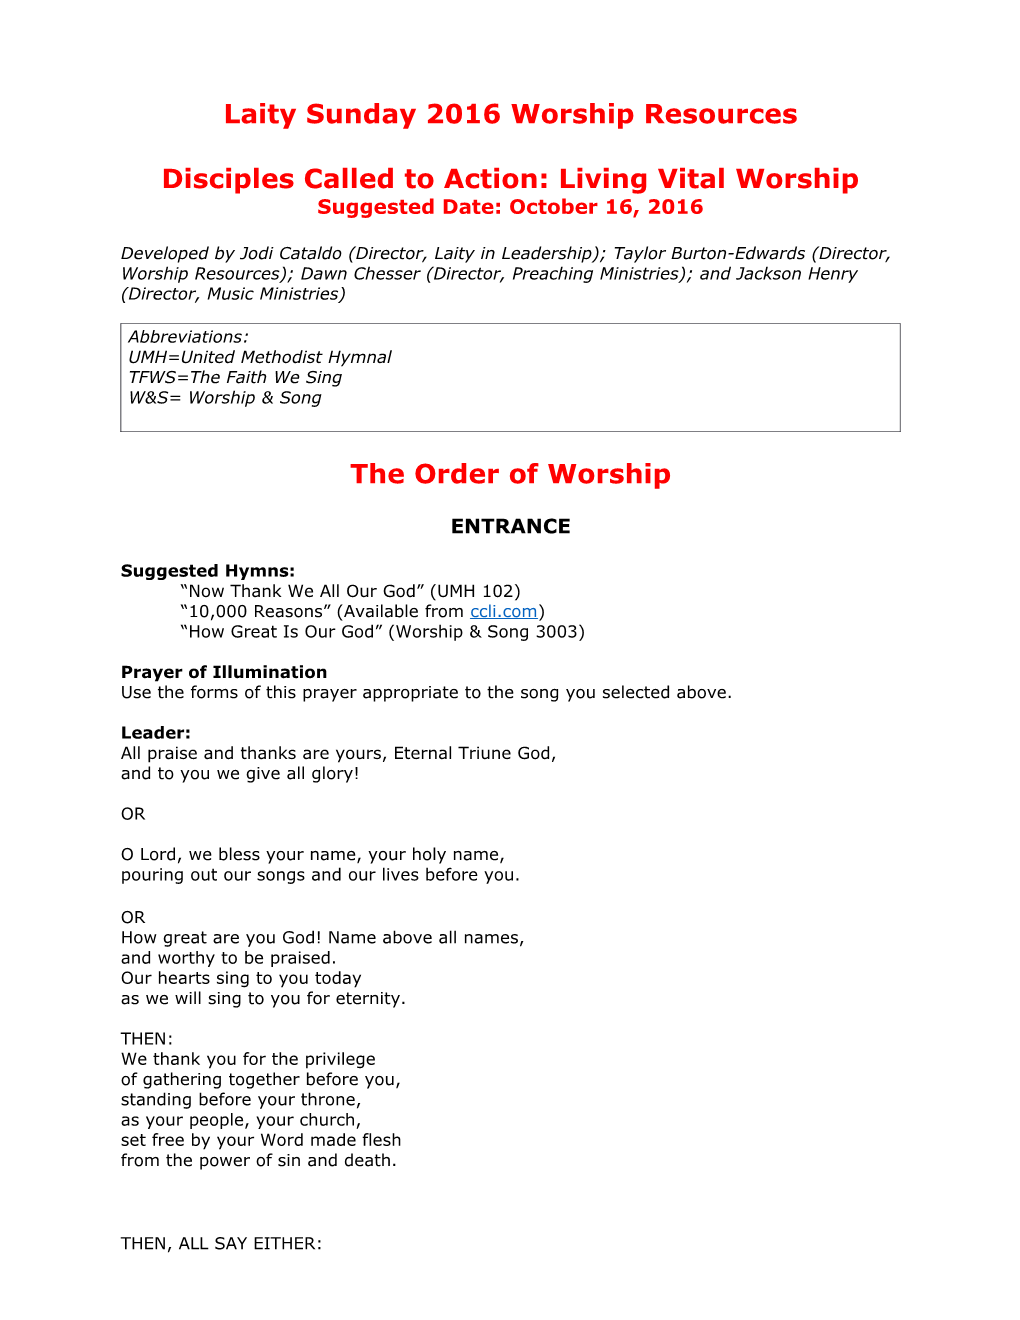 Disciples Called to Action: Living Vital Worship